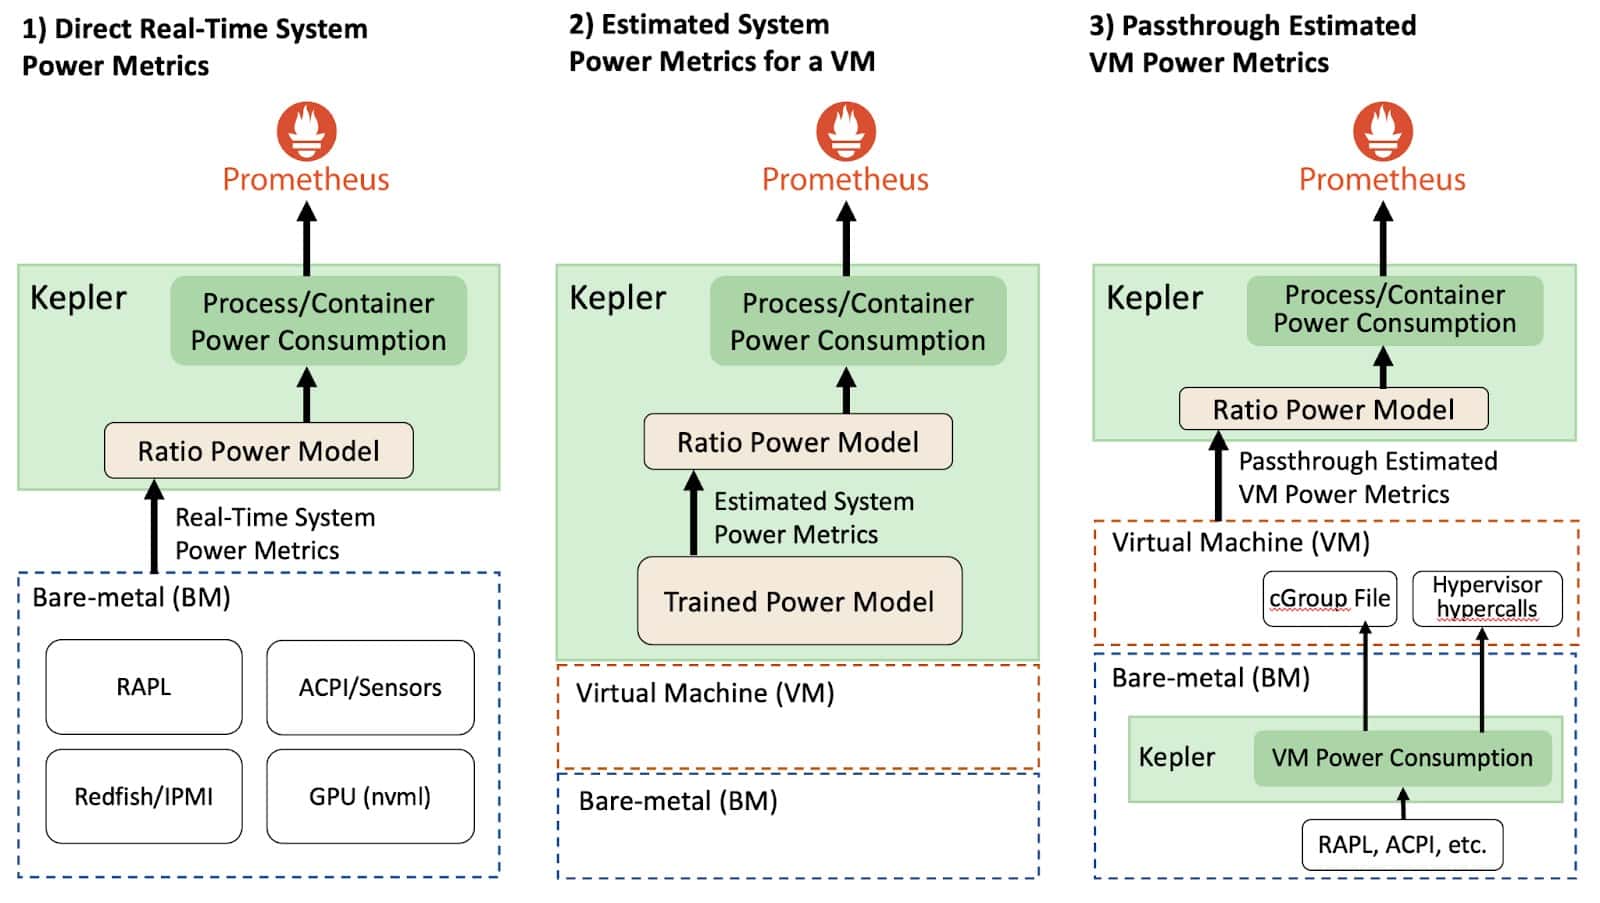 Diagram flow showing sample on collecting system power consumption - VMS versus BMs